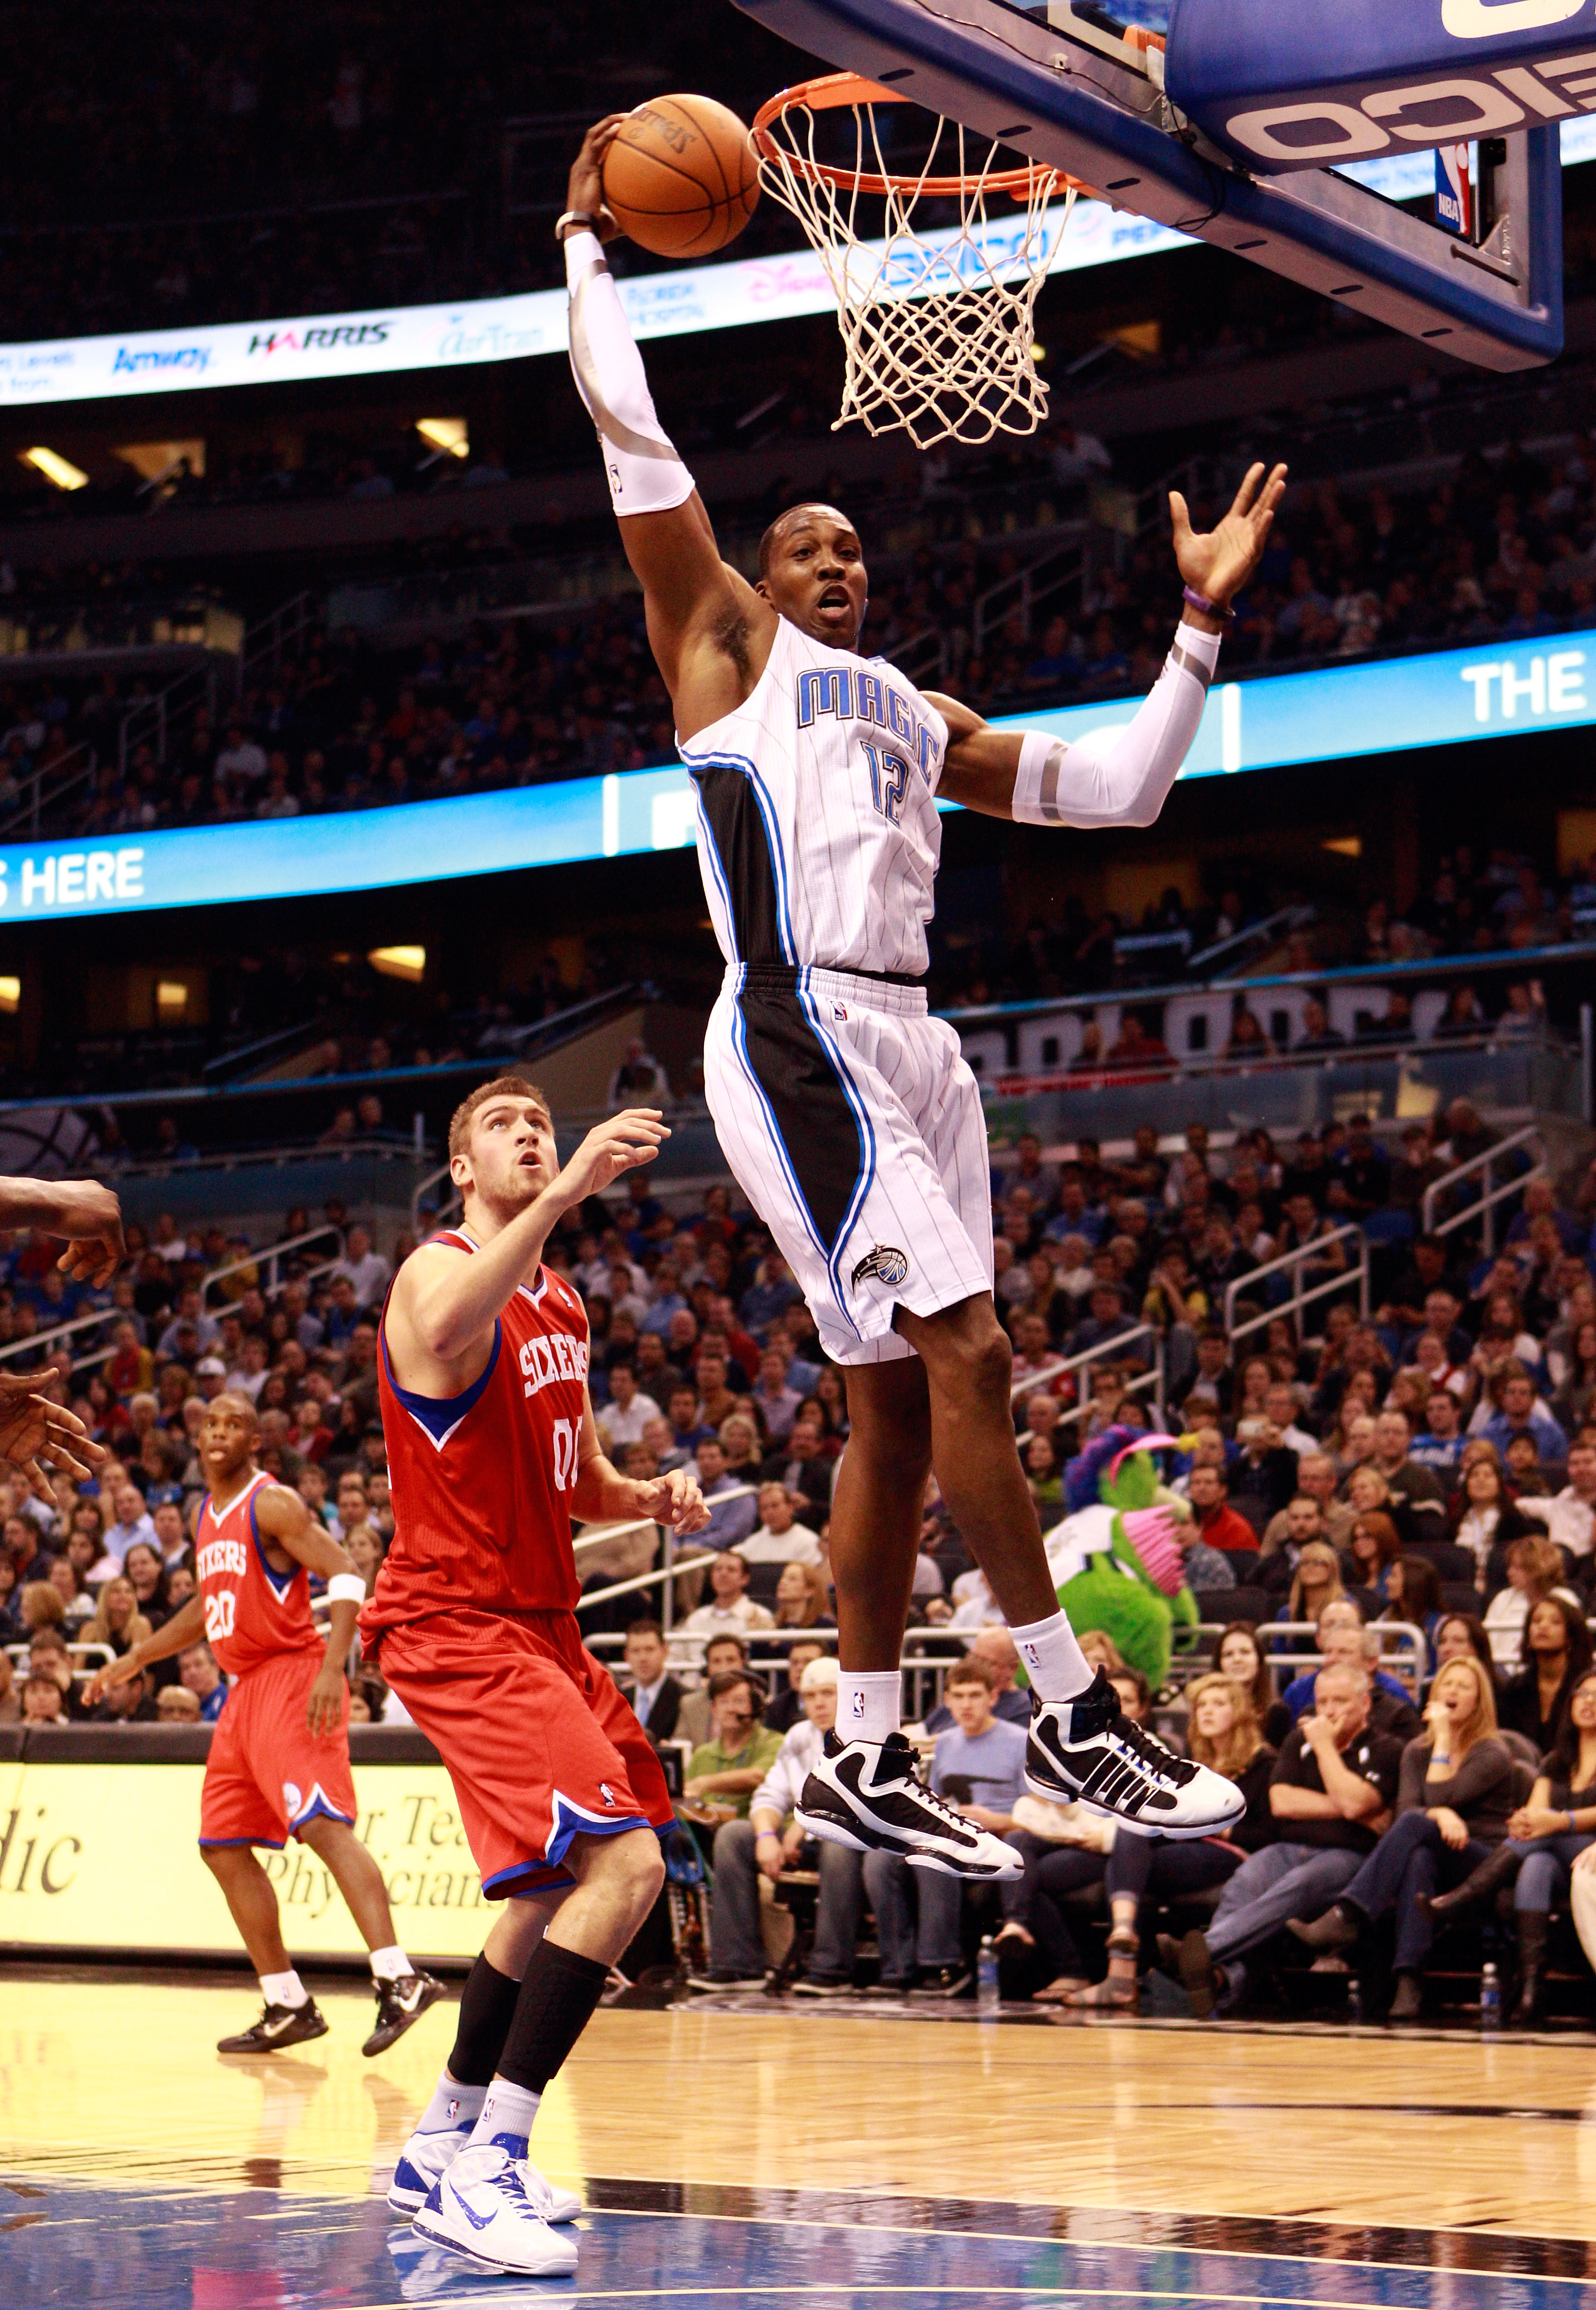 ORLANDO, FL - DECEMBER 18:  Dwight Howard #12 of the Orlando Magic attempts a shot during the game against the Philadelphia 76ers at Amway Arena on December 18, 2010 in Orlando, Florida.  NOTE TO USER: User expressly acknowledges and agrees that, by downl